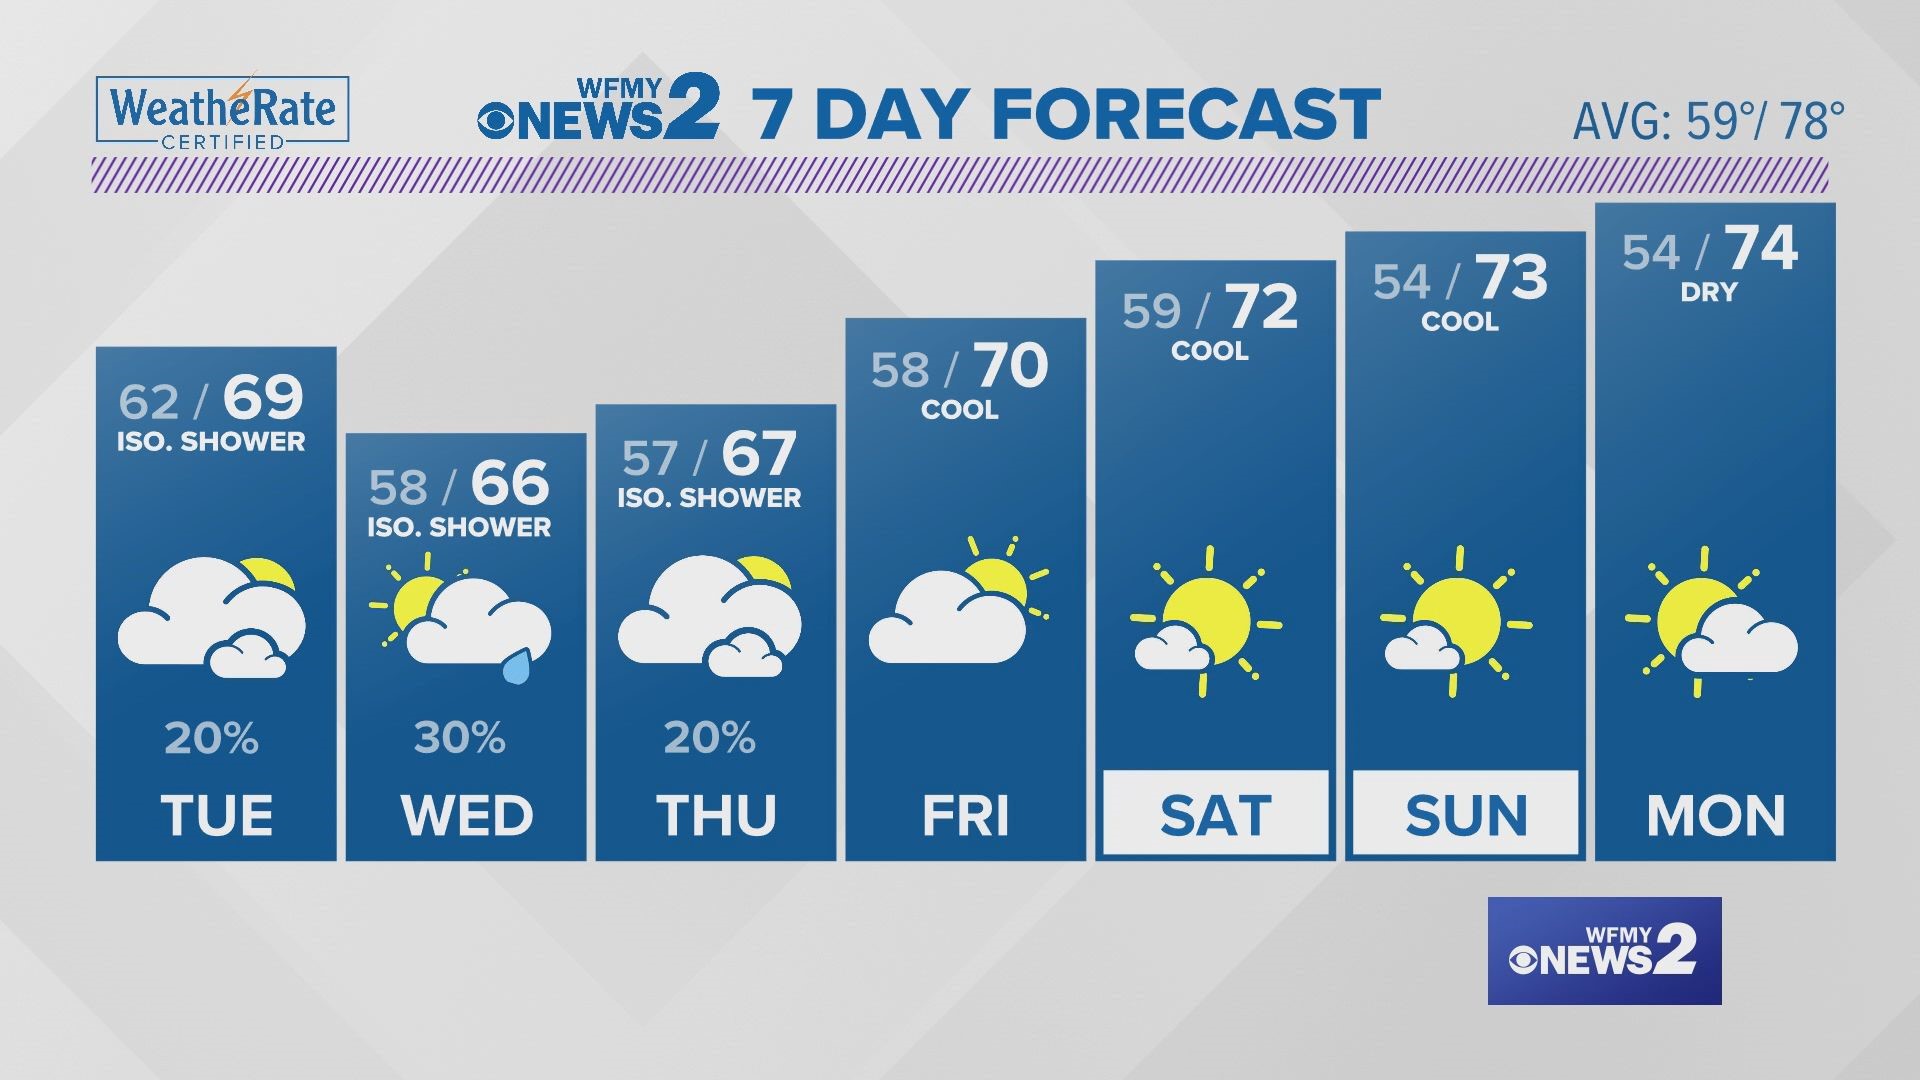 Brief warm-up today, cooler the rest of the week